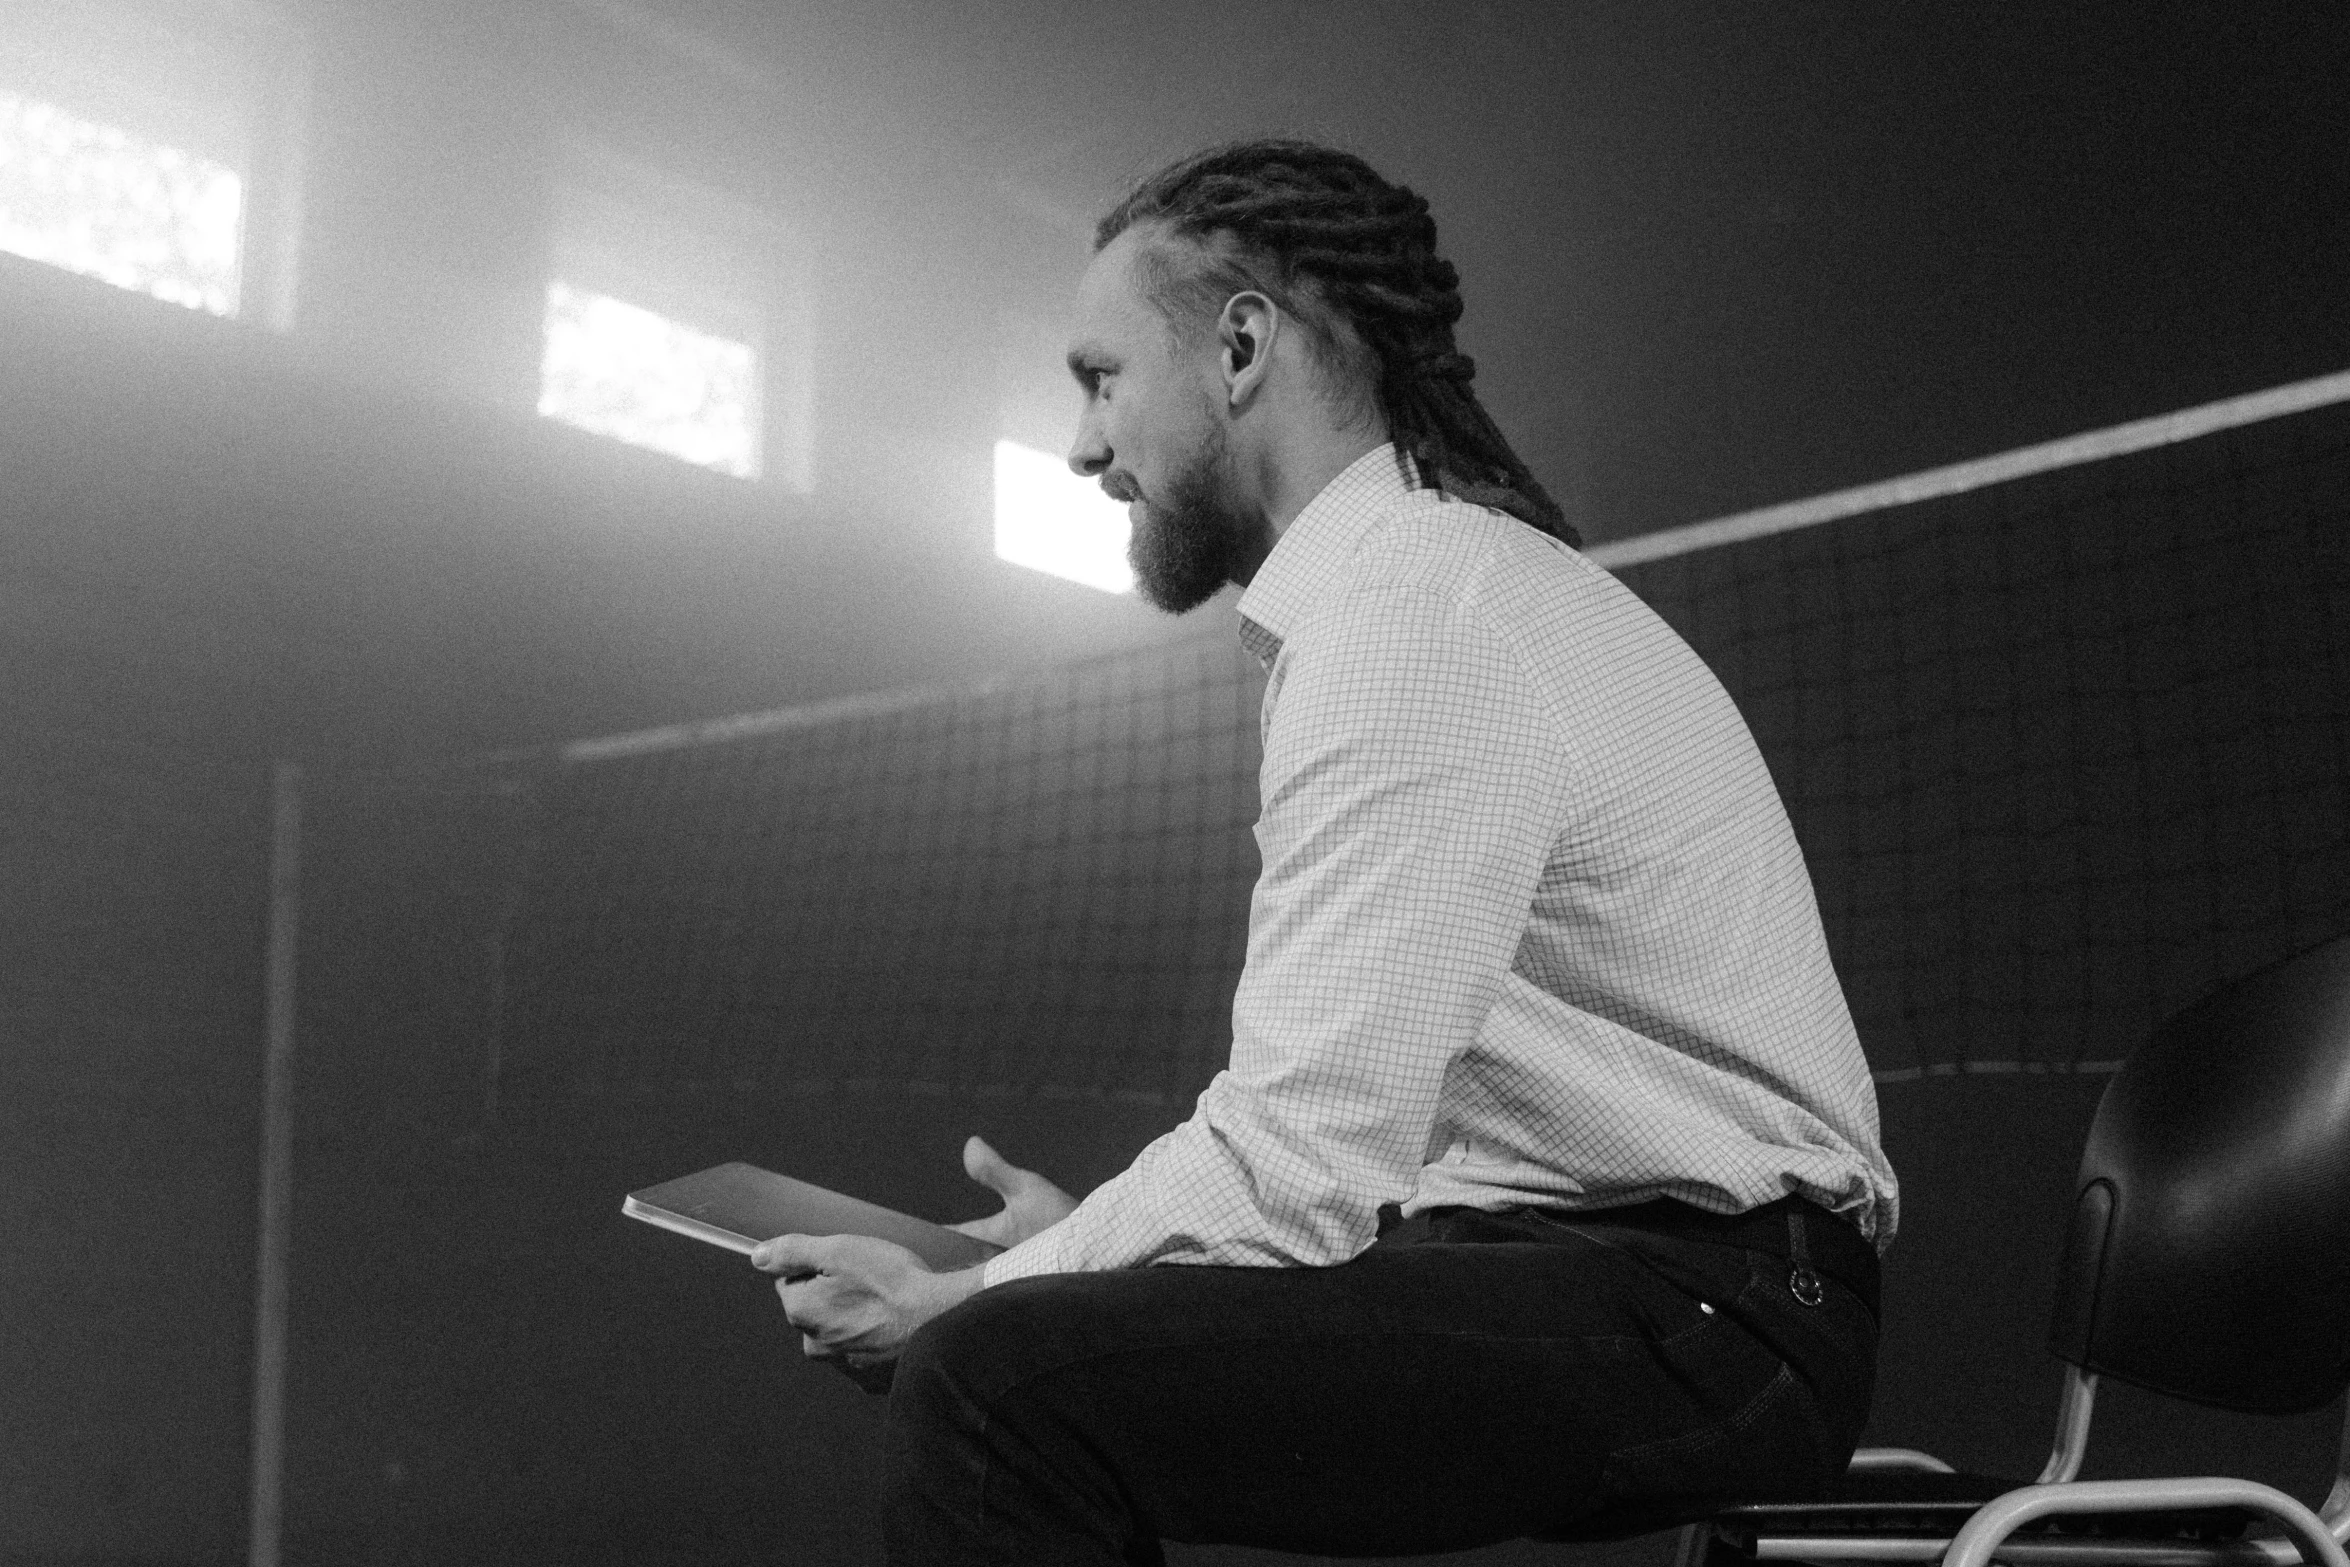 a black and white photo of a man sitting on a chair, unsplash, wearing a volleyball jersey, braided beard redhead dreadlocks, technology, conor mcgregor